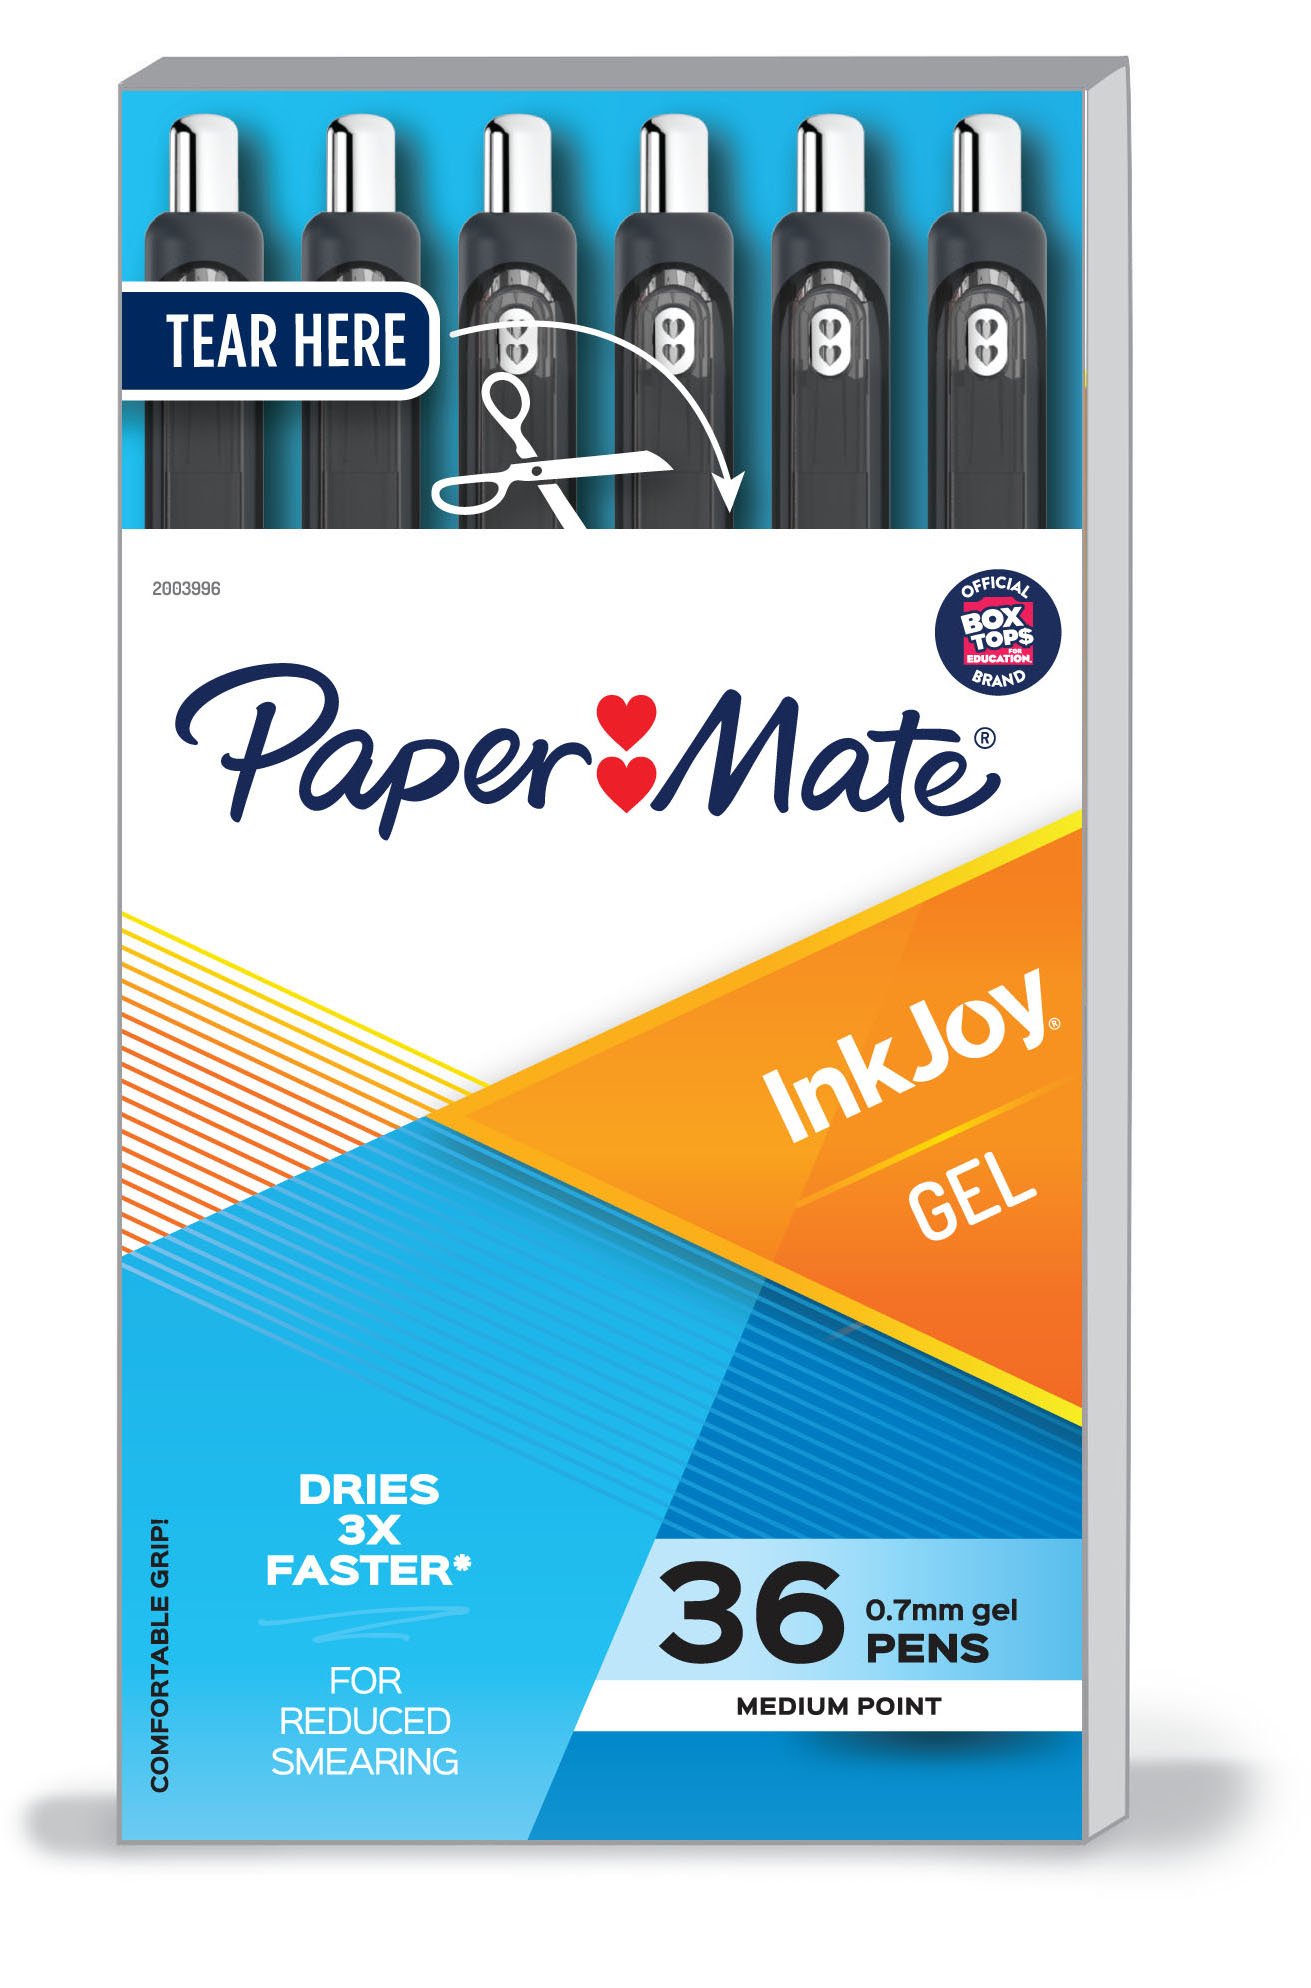 Paper Mate InkJoy Gel Red Pen Medium Point 0.7 mm Retractable Pack of 6Pens and Pencils